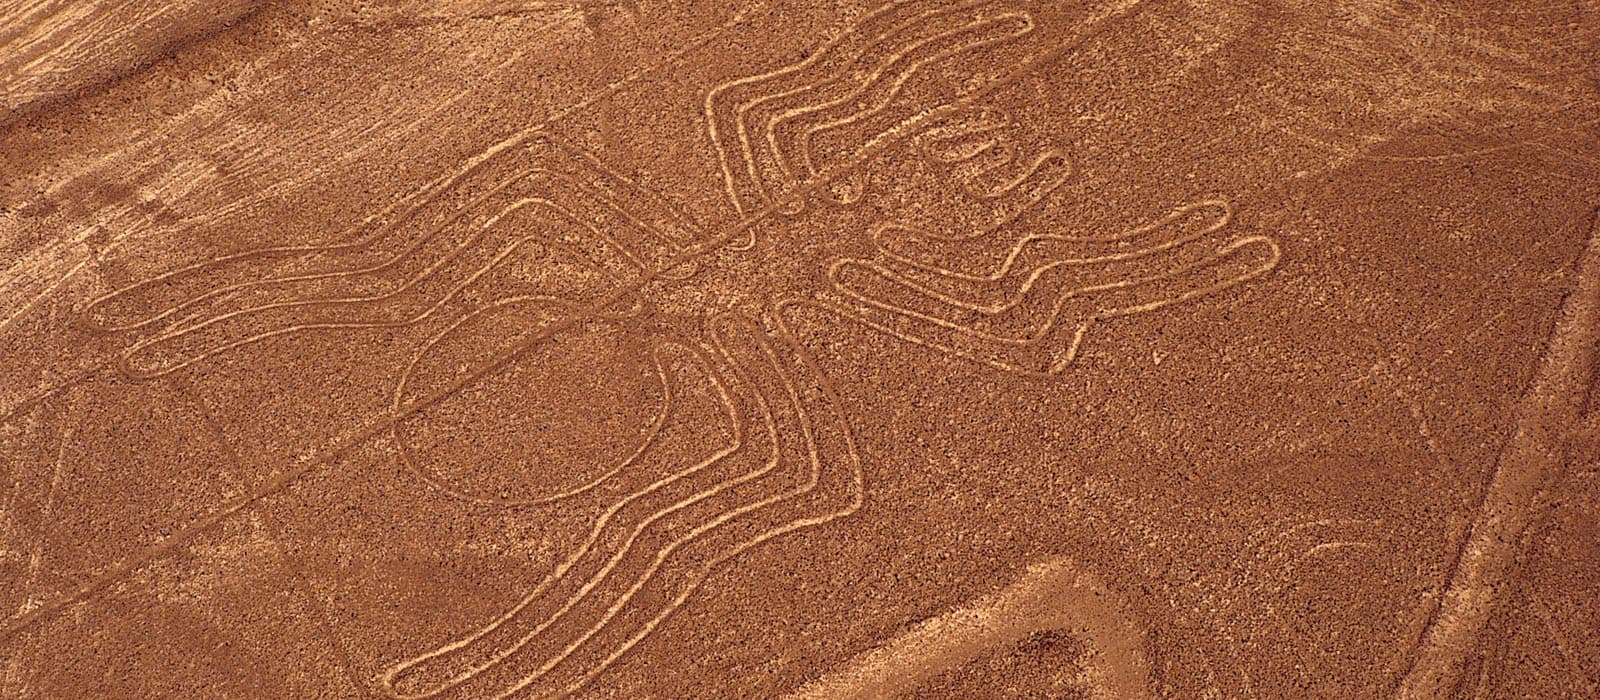 Airplane view of the Nazca line spider